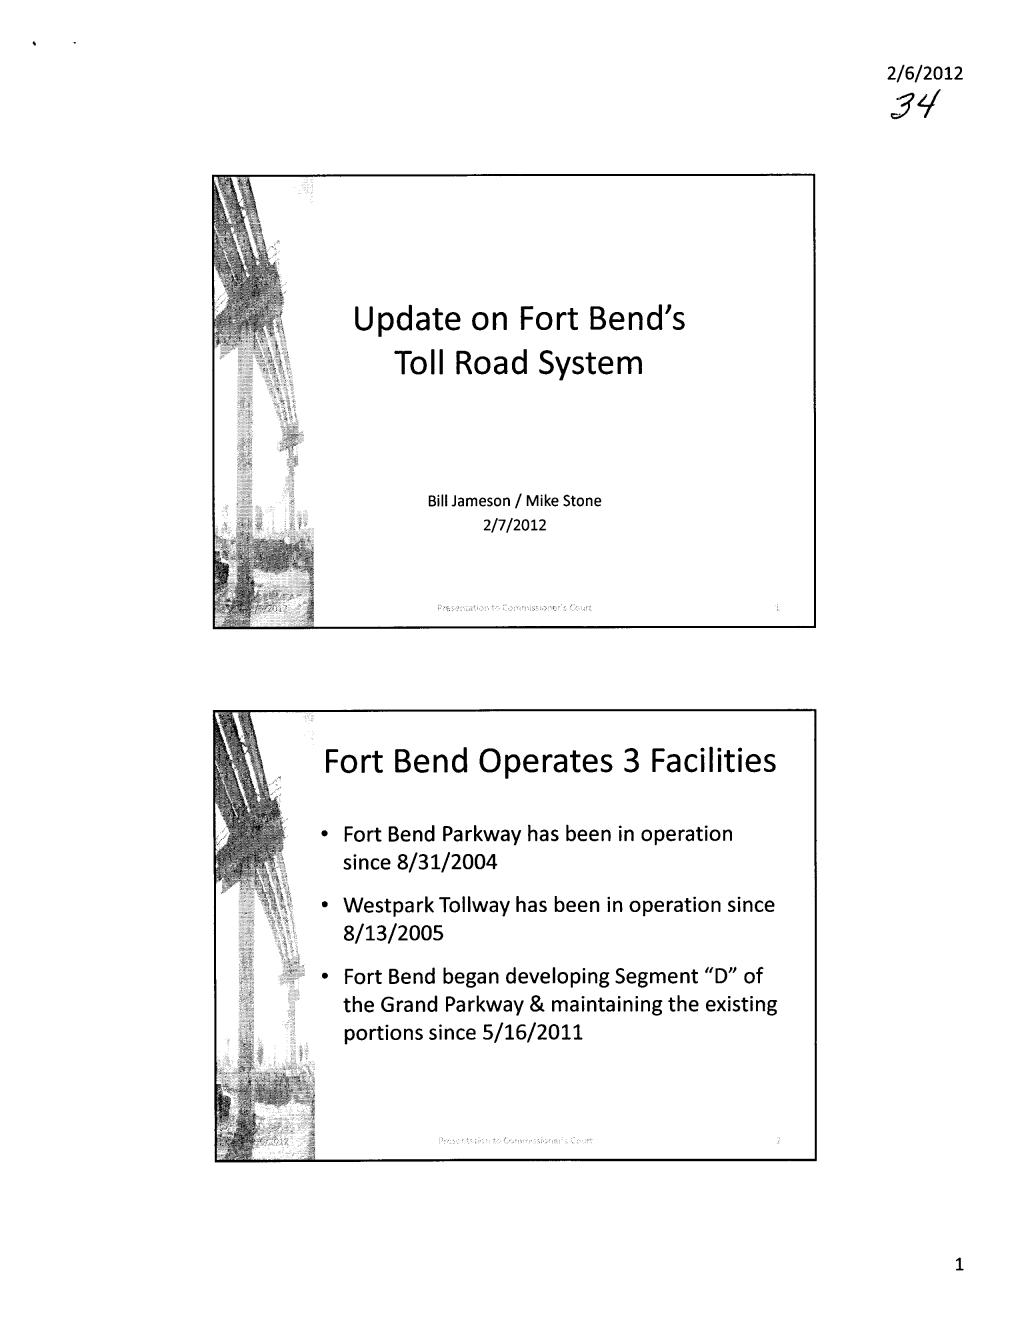 Update on Fort Bend's Fort Bend Operates 3 Facilities